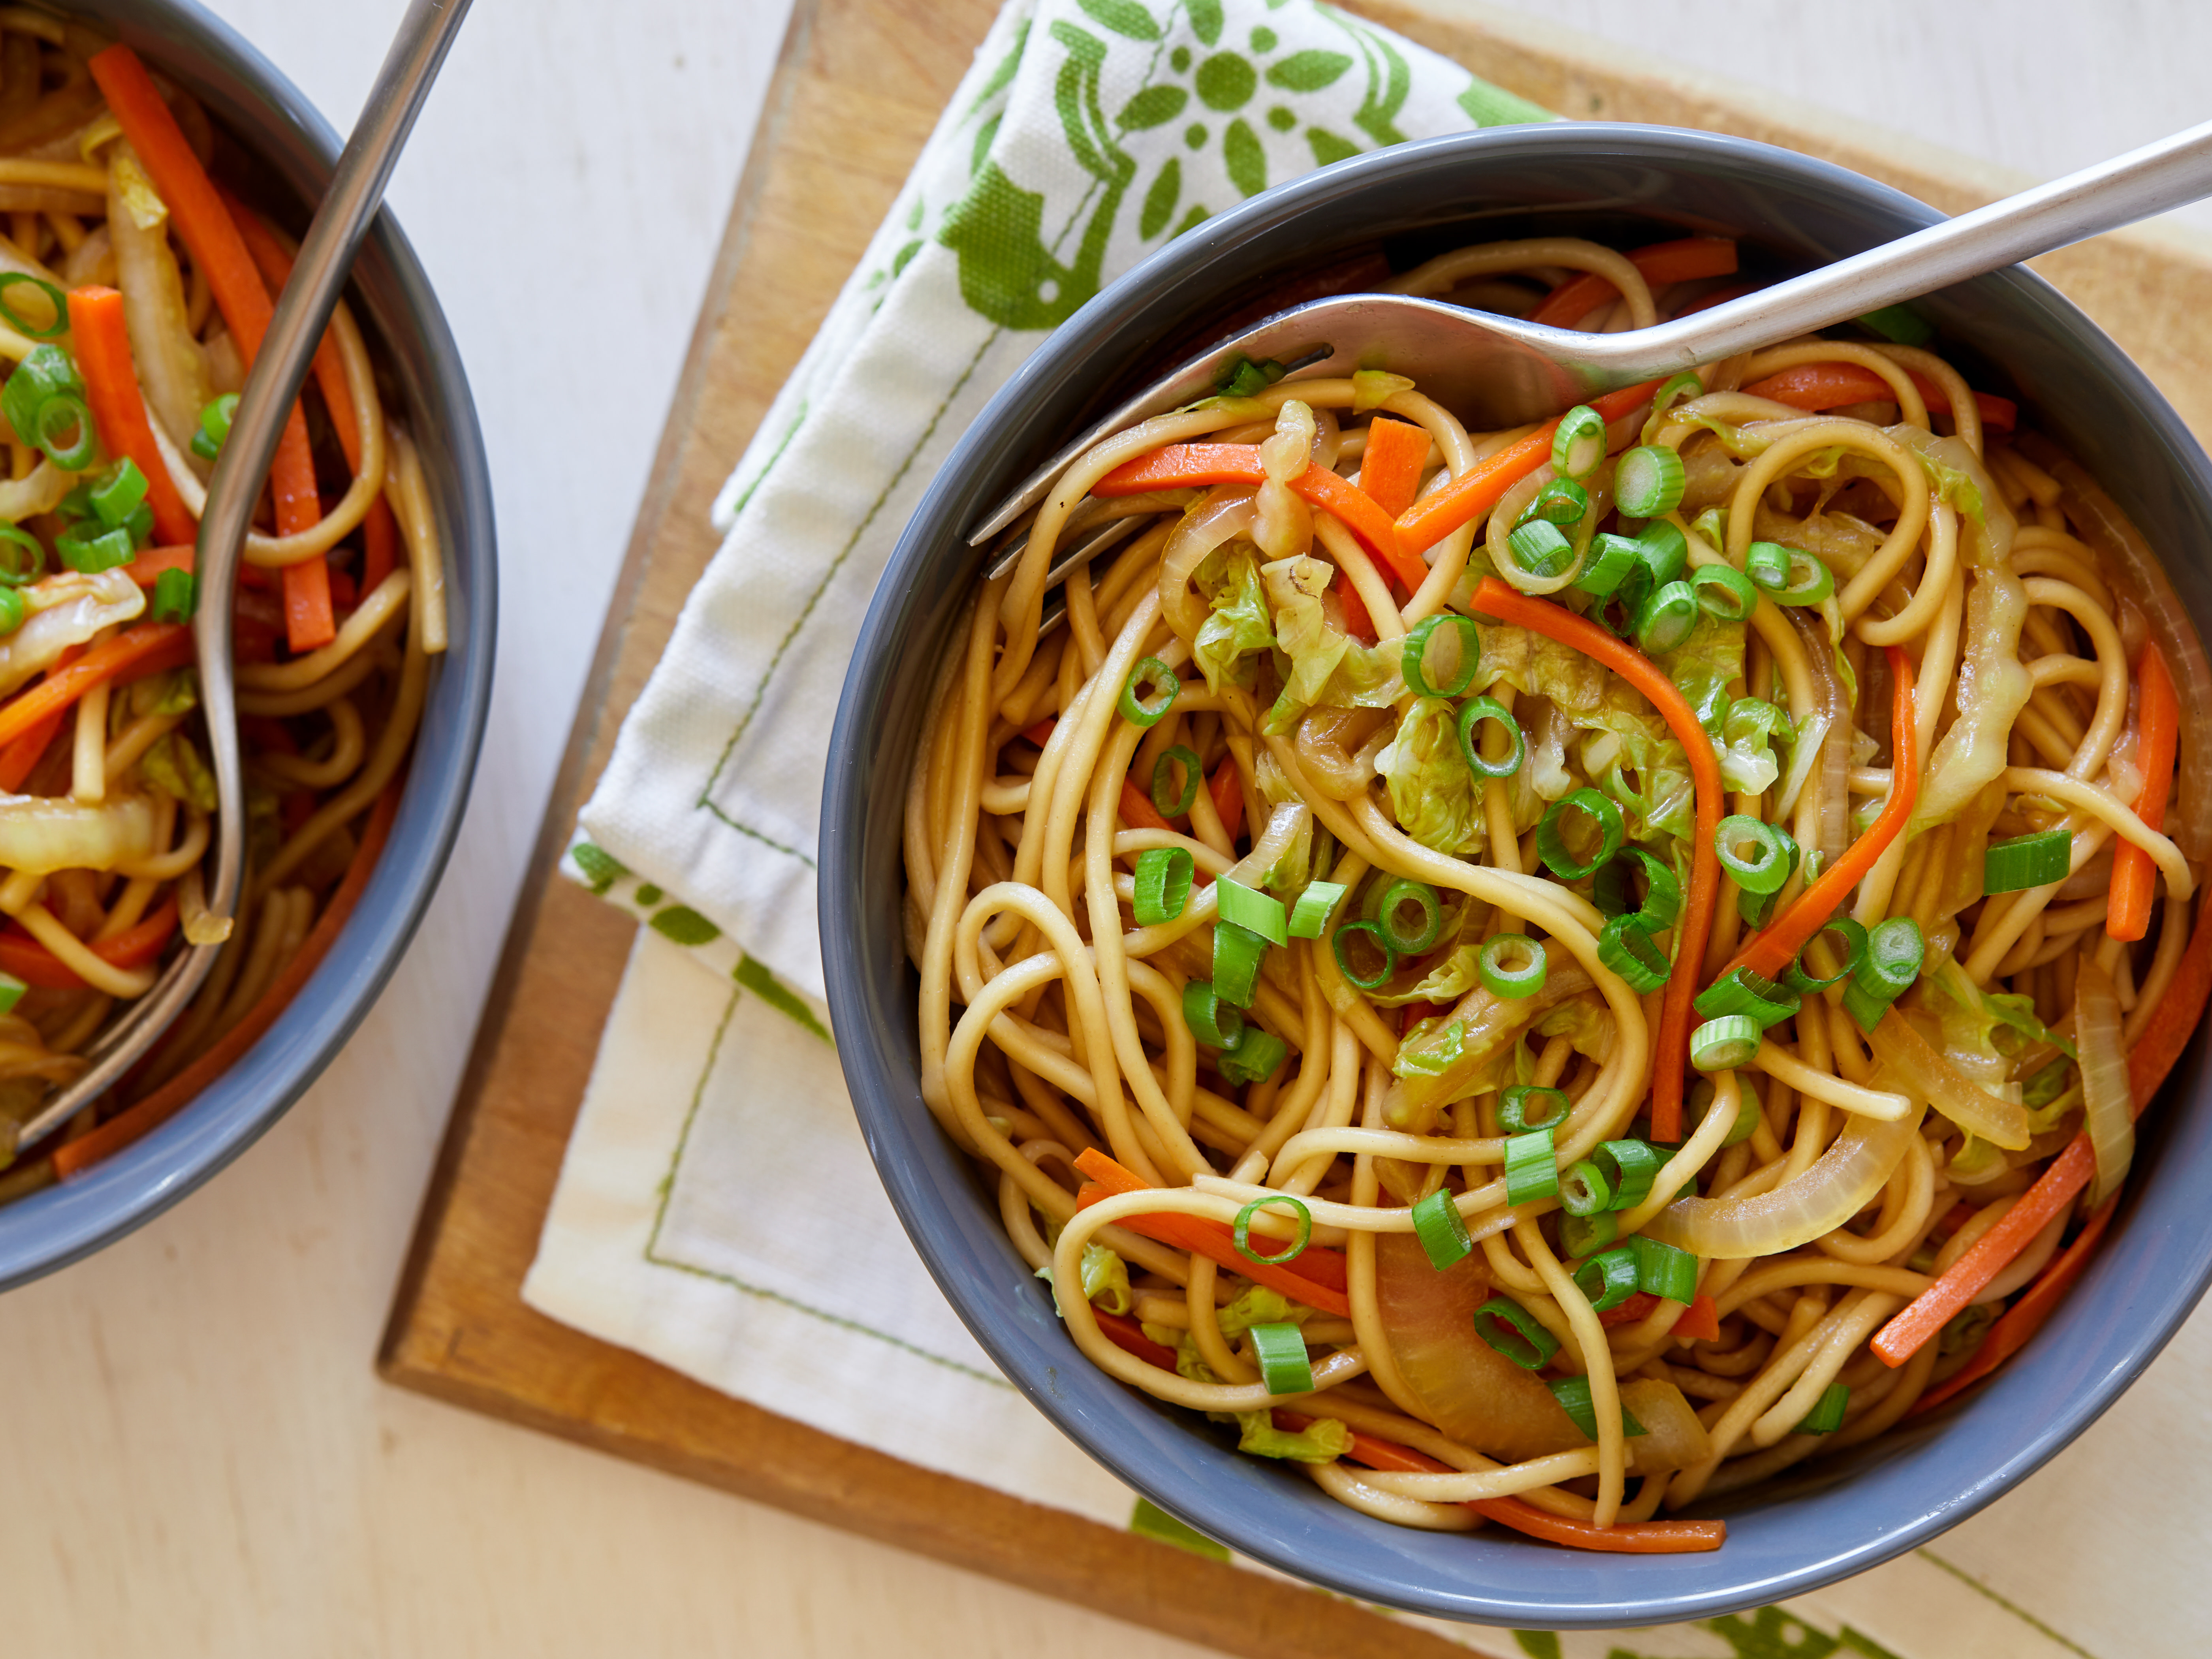 Angel Hair Vegetable Chow Mein Recipe - Dish Ditty